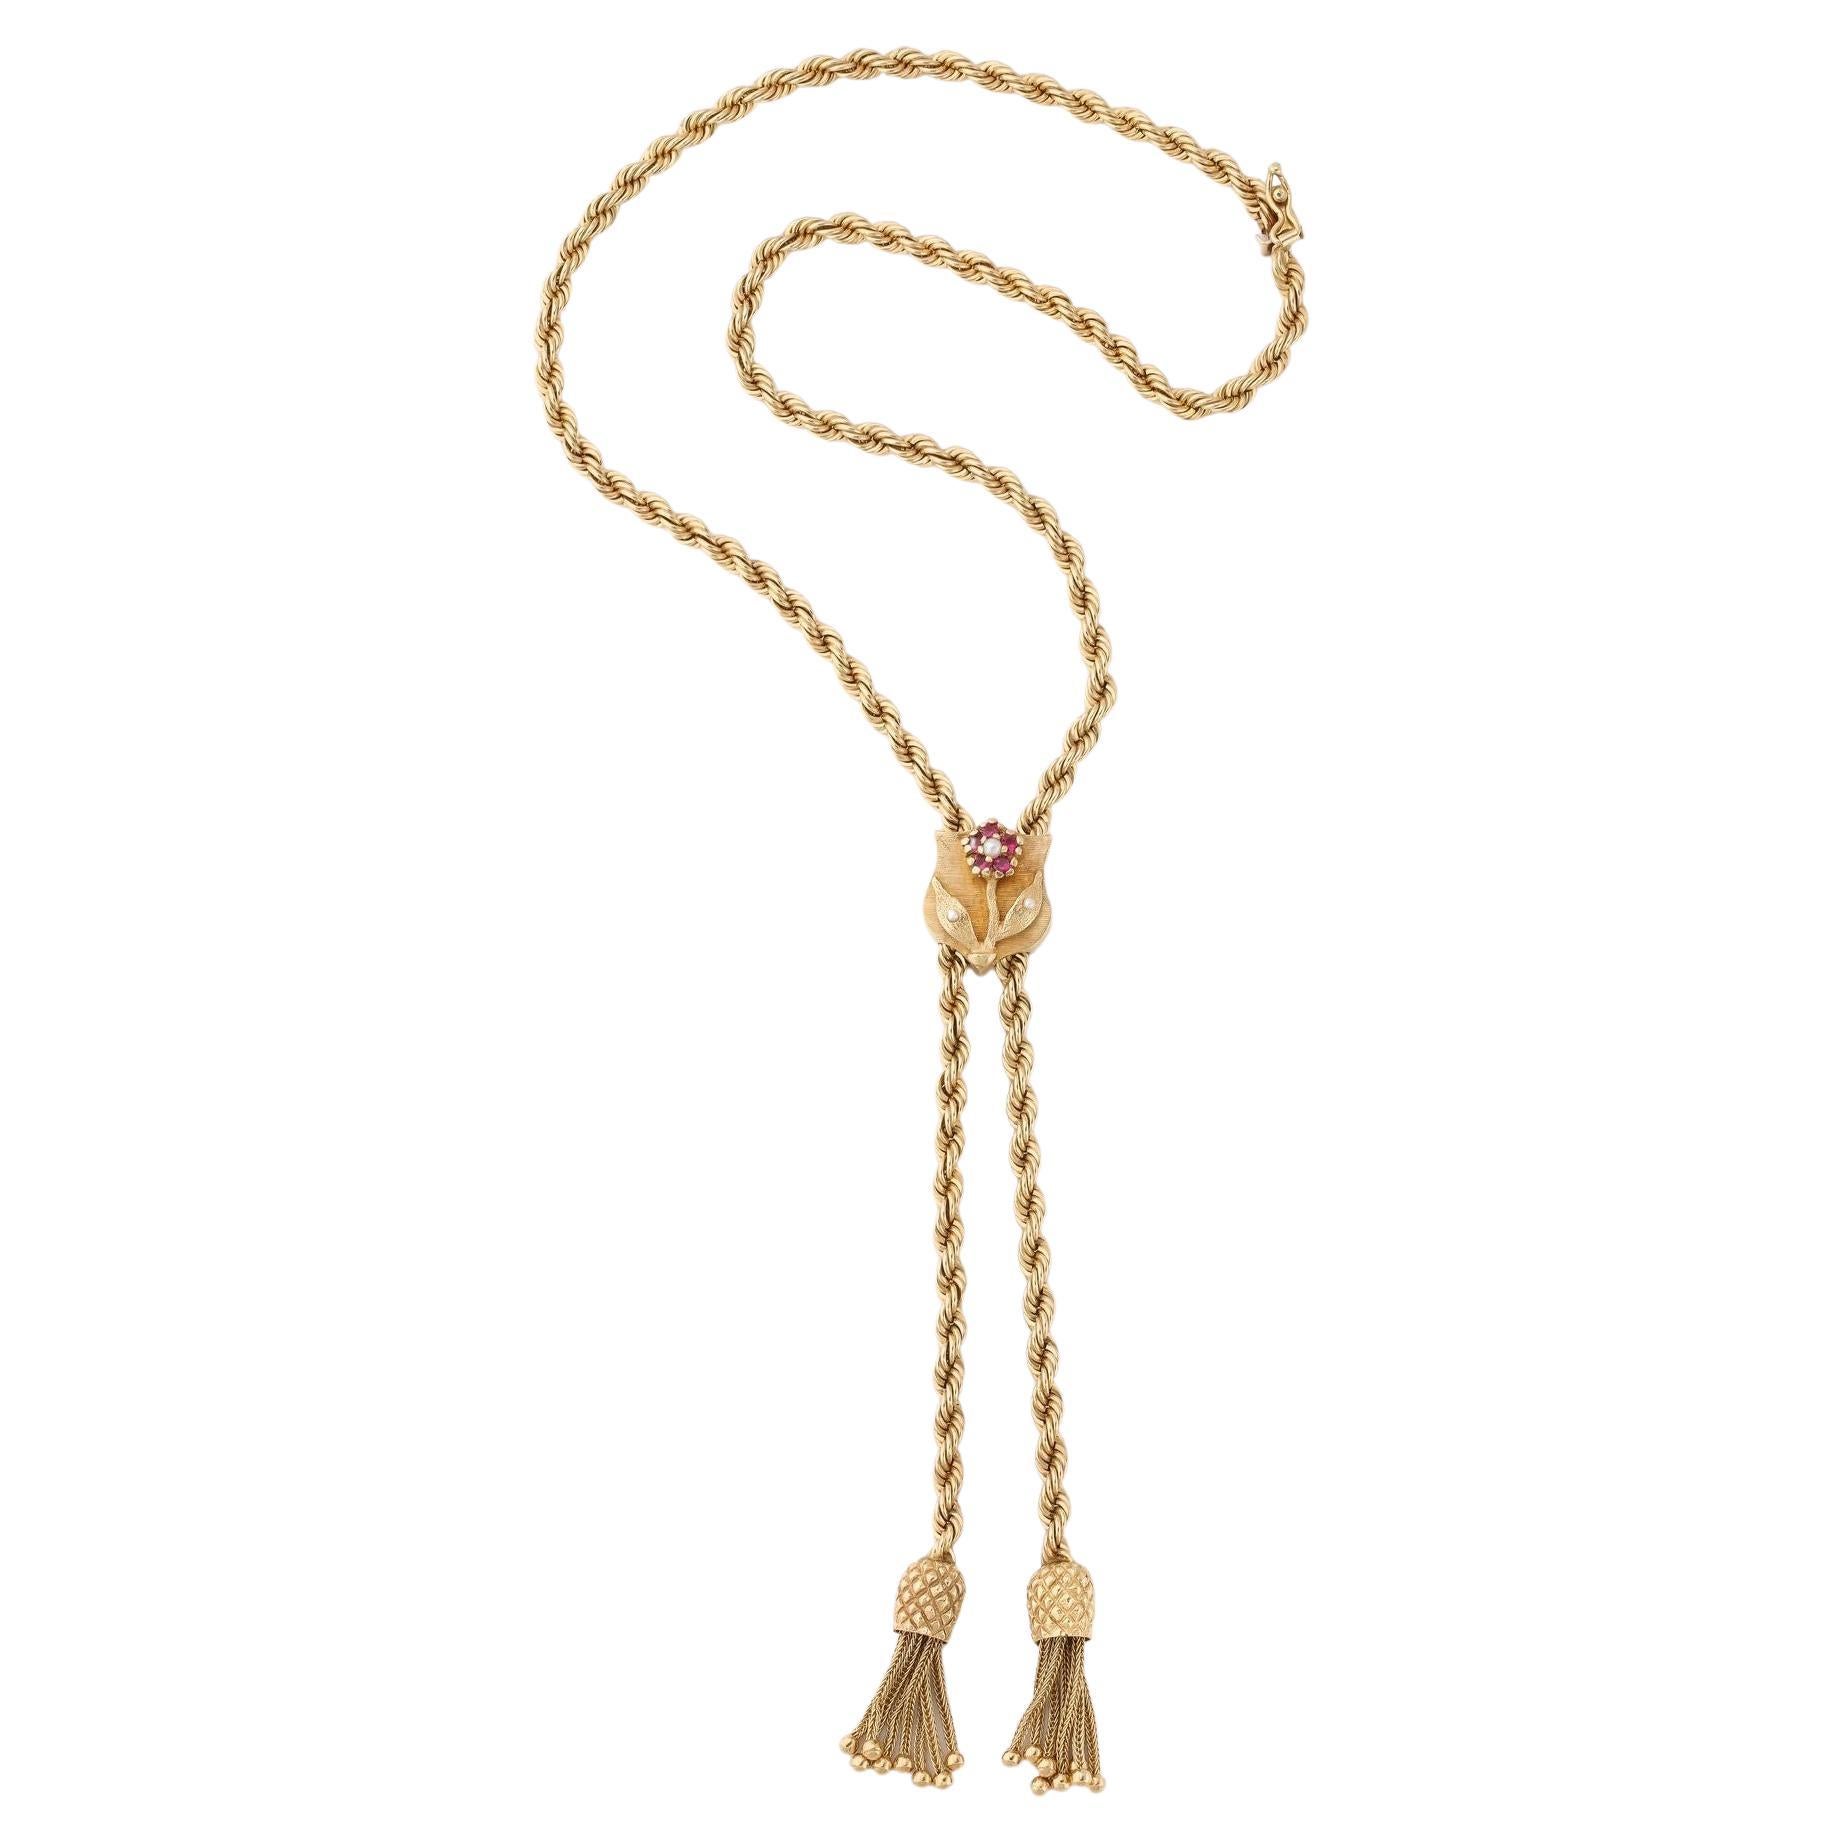 Retro Gold Lariat on Rope Twist Chain with Tassels and a Ruby and Pearl Flower For Sale